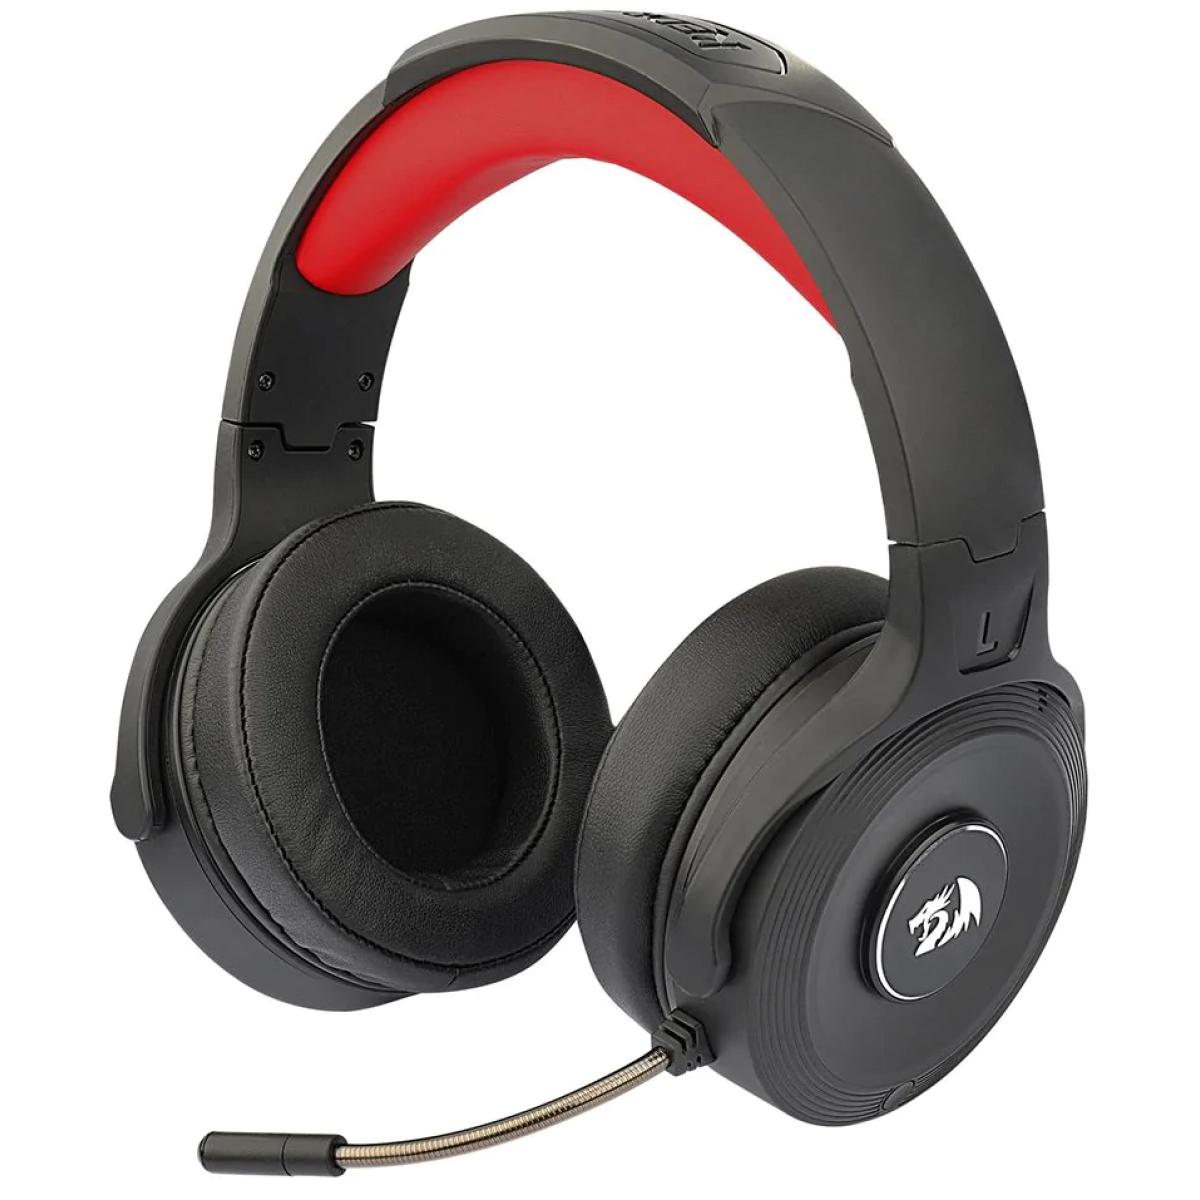 Redragon H818 Pro PELOPS Pro Wireless 7.1 Surround Sound up to 12 Hours Battery